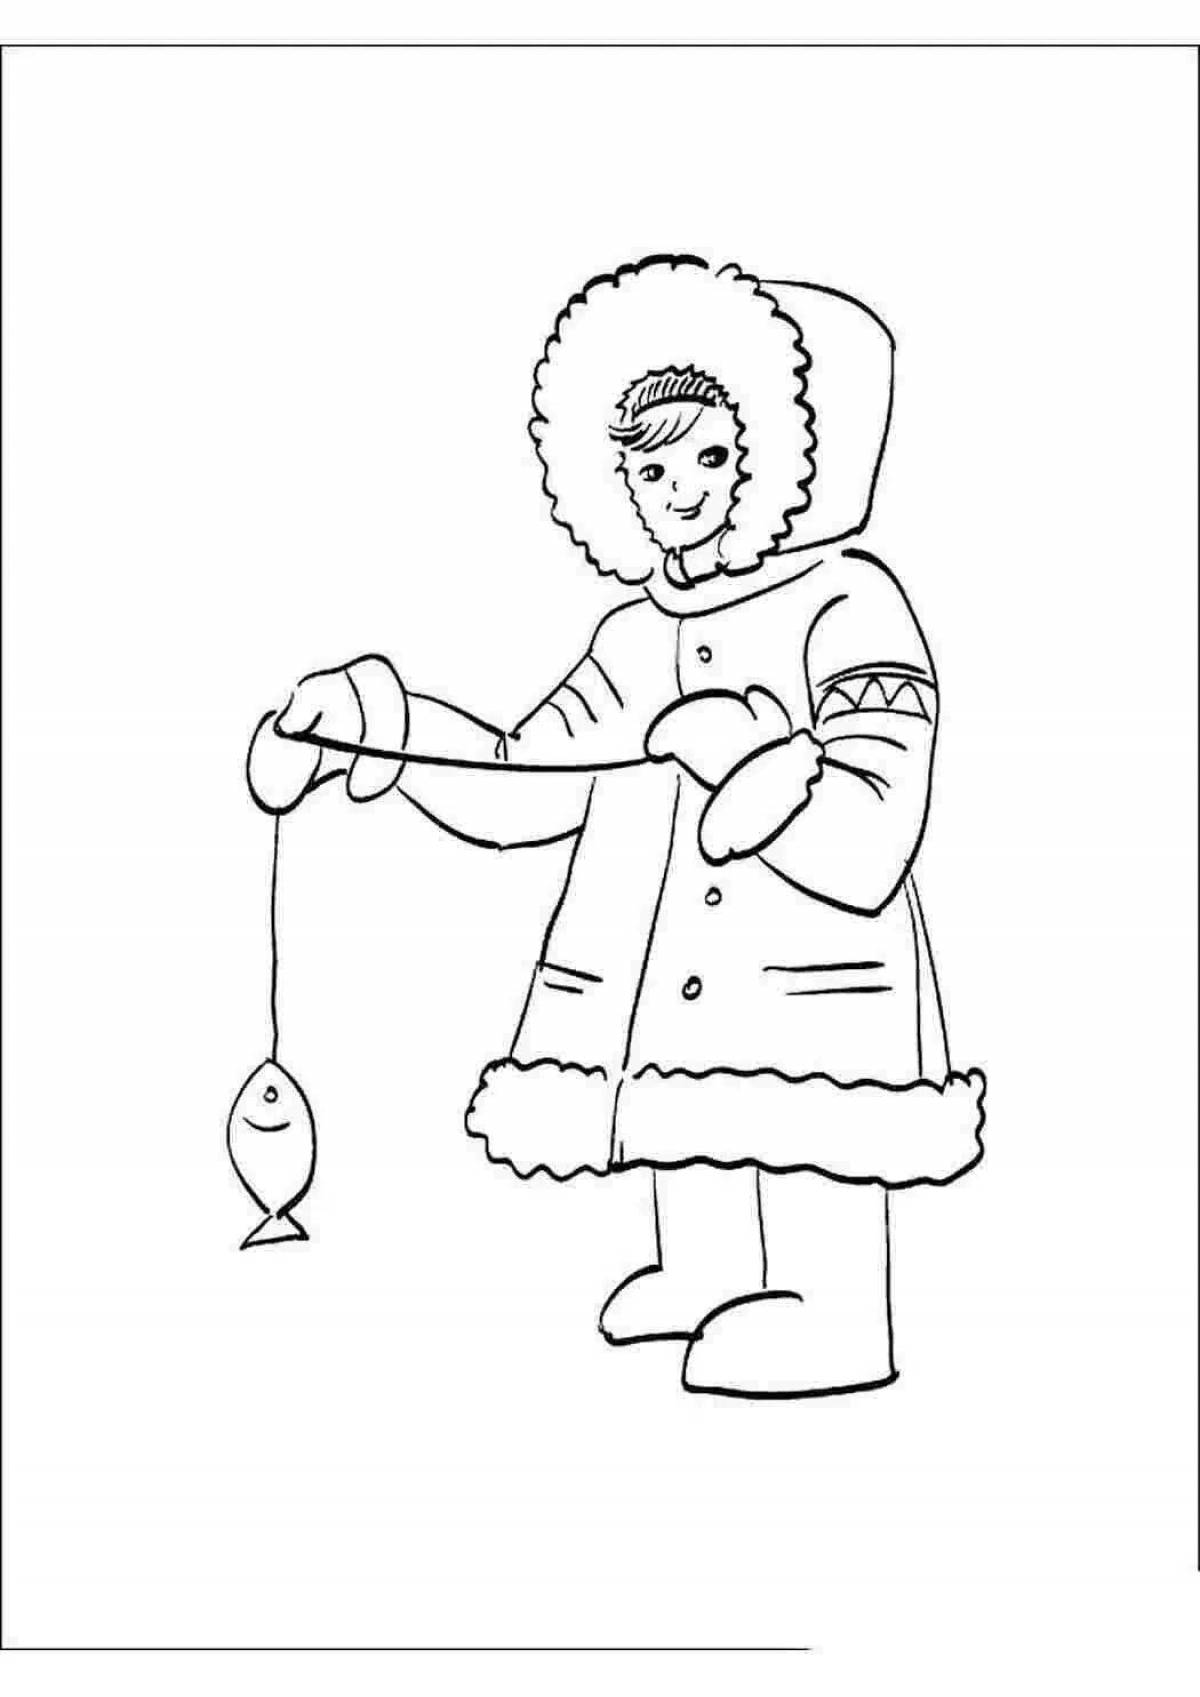 A fascinating Chukchi coloring book for kids